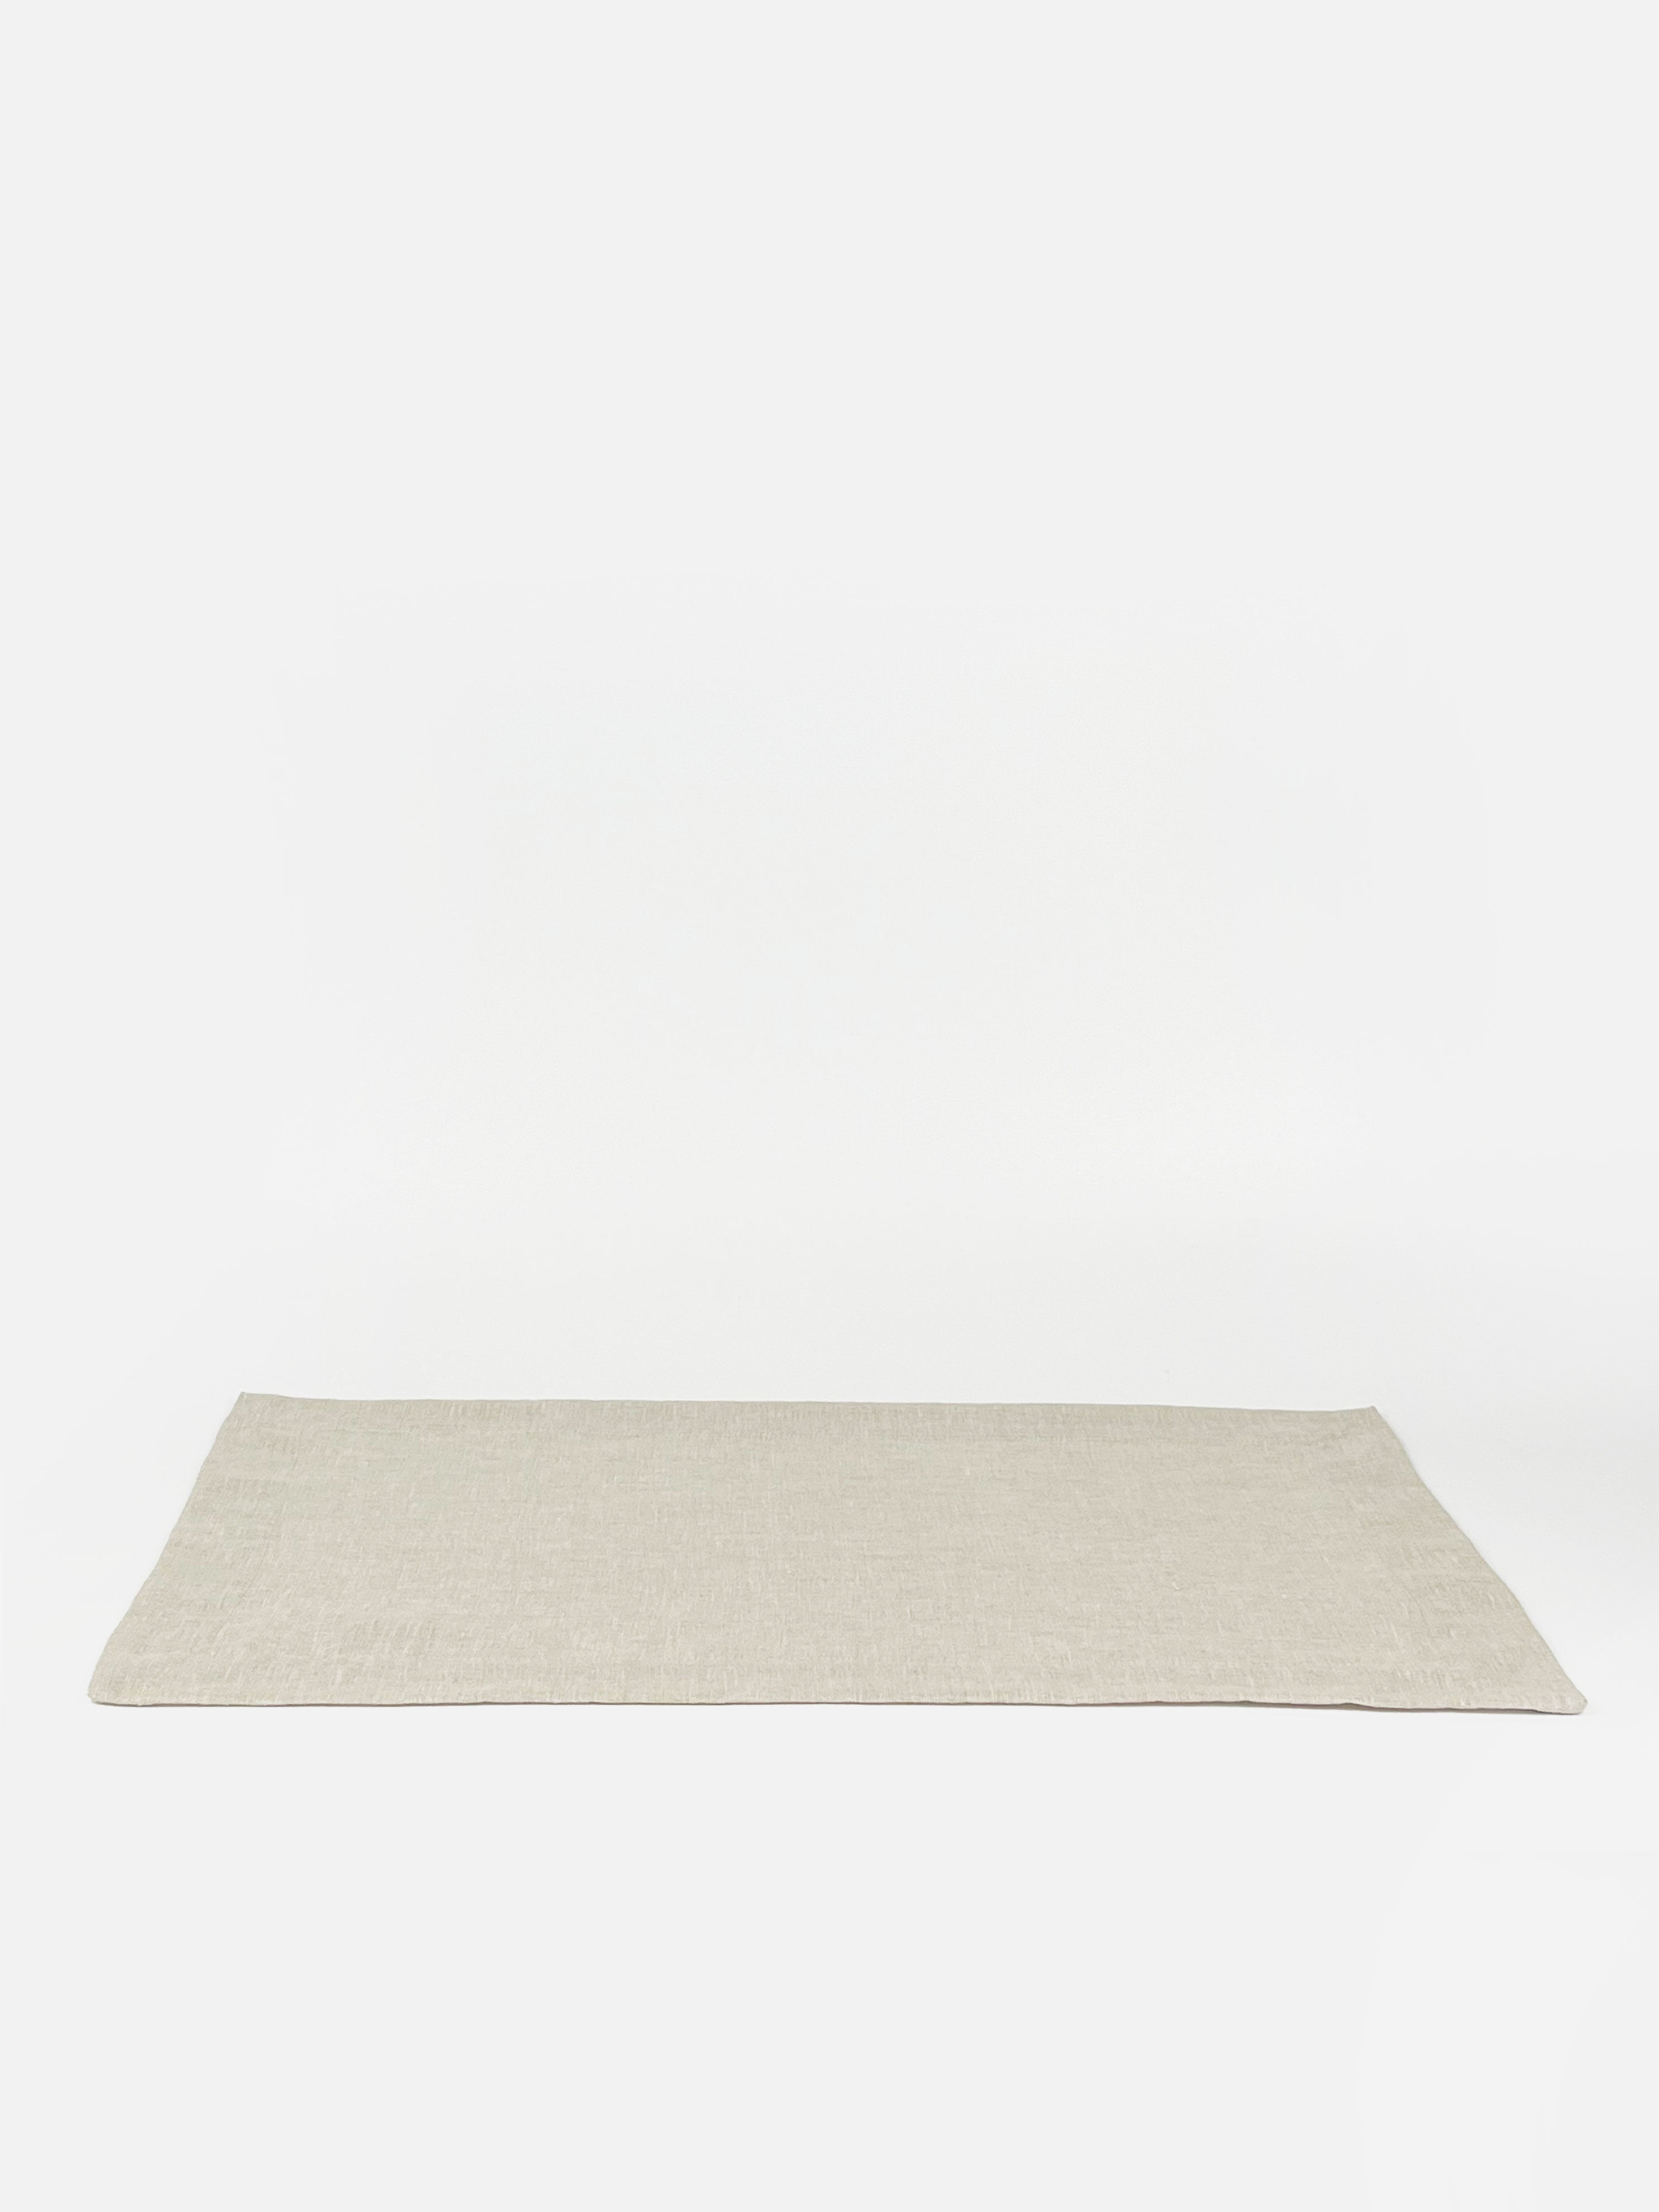 French Flax Linen Placemat Set of 4